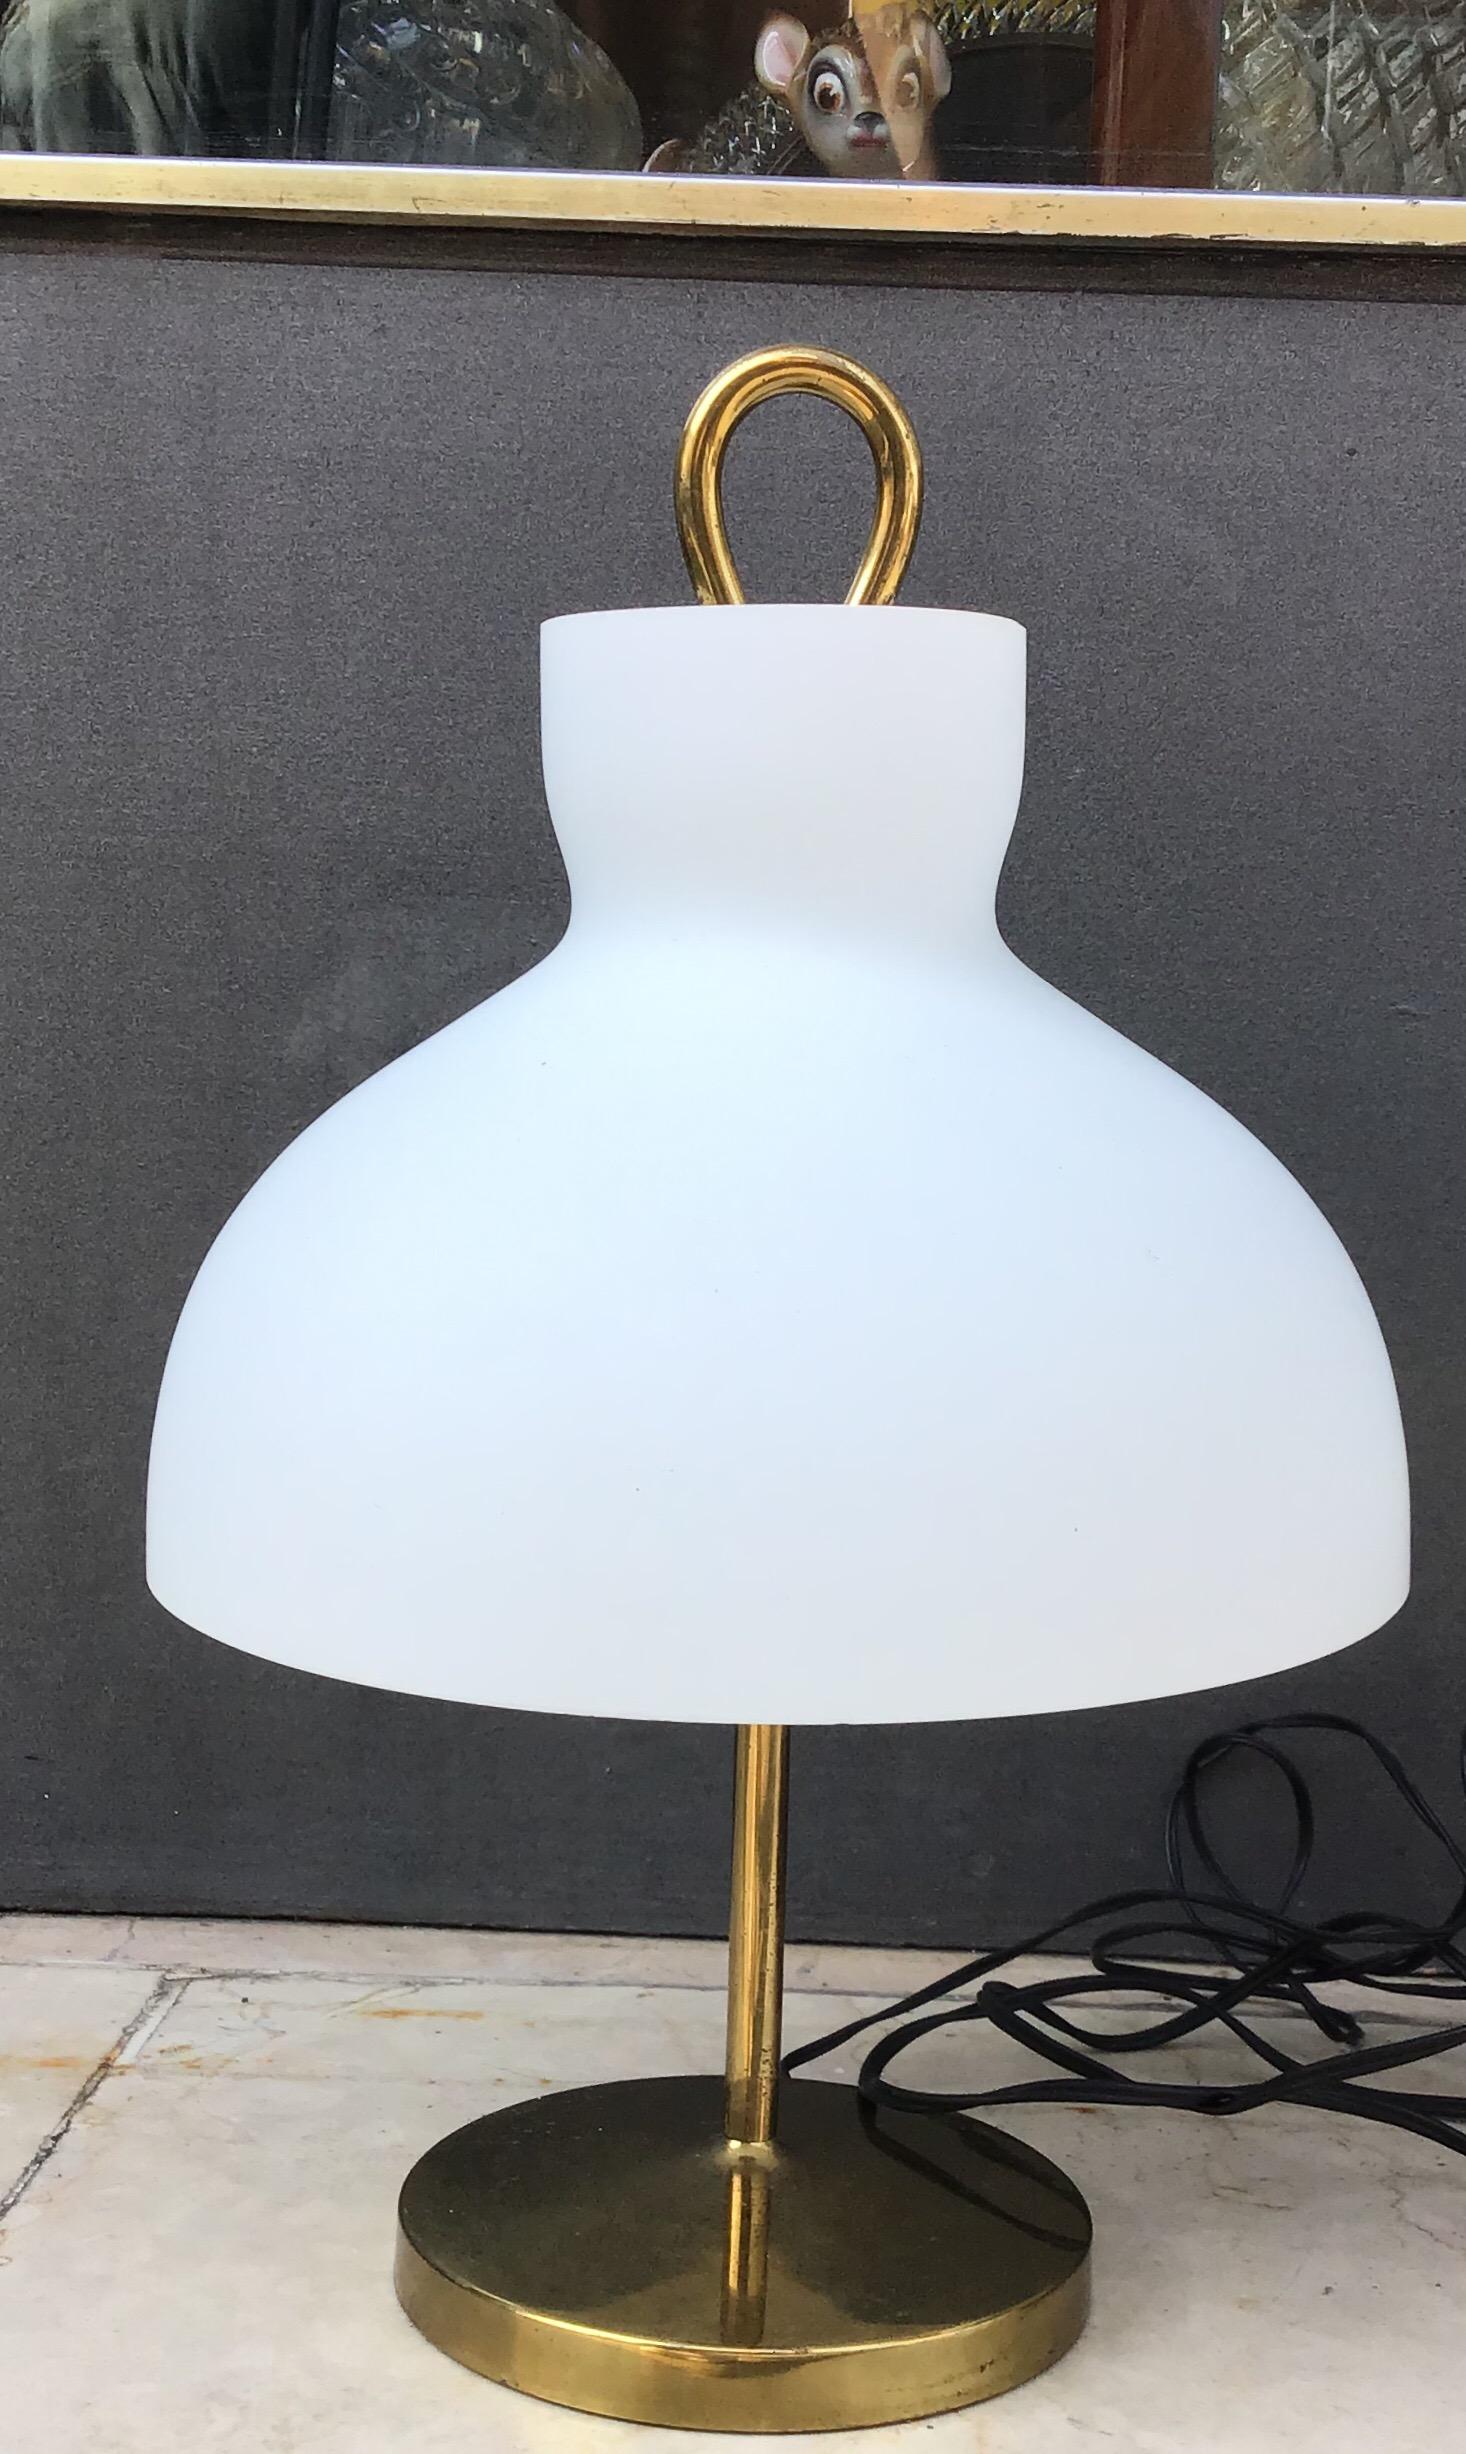 Other Ignazio Gardella Table Lamps Azucena Brass and Opaline Glass 1950 Italy